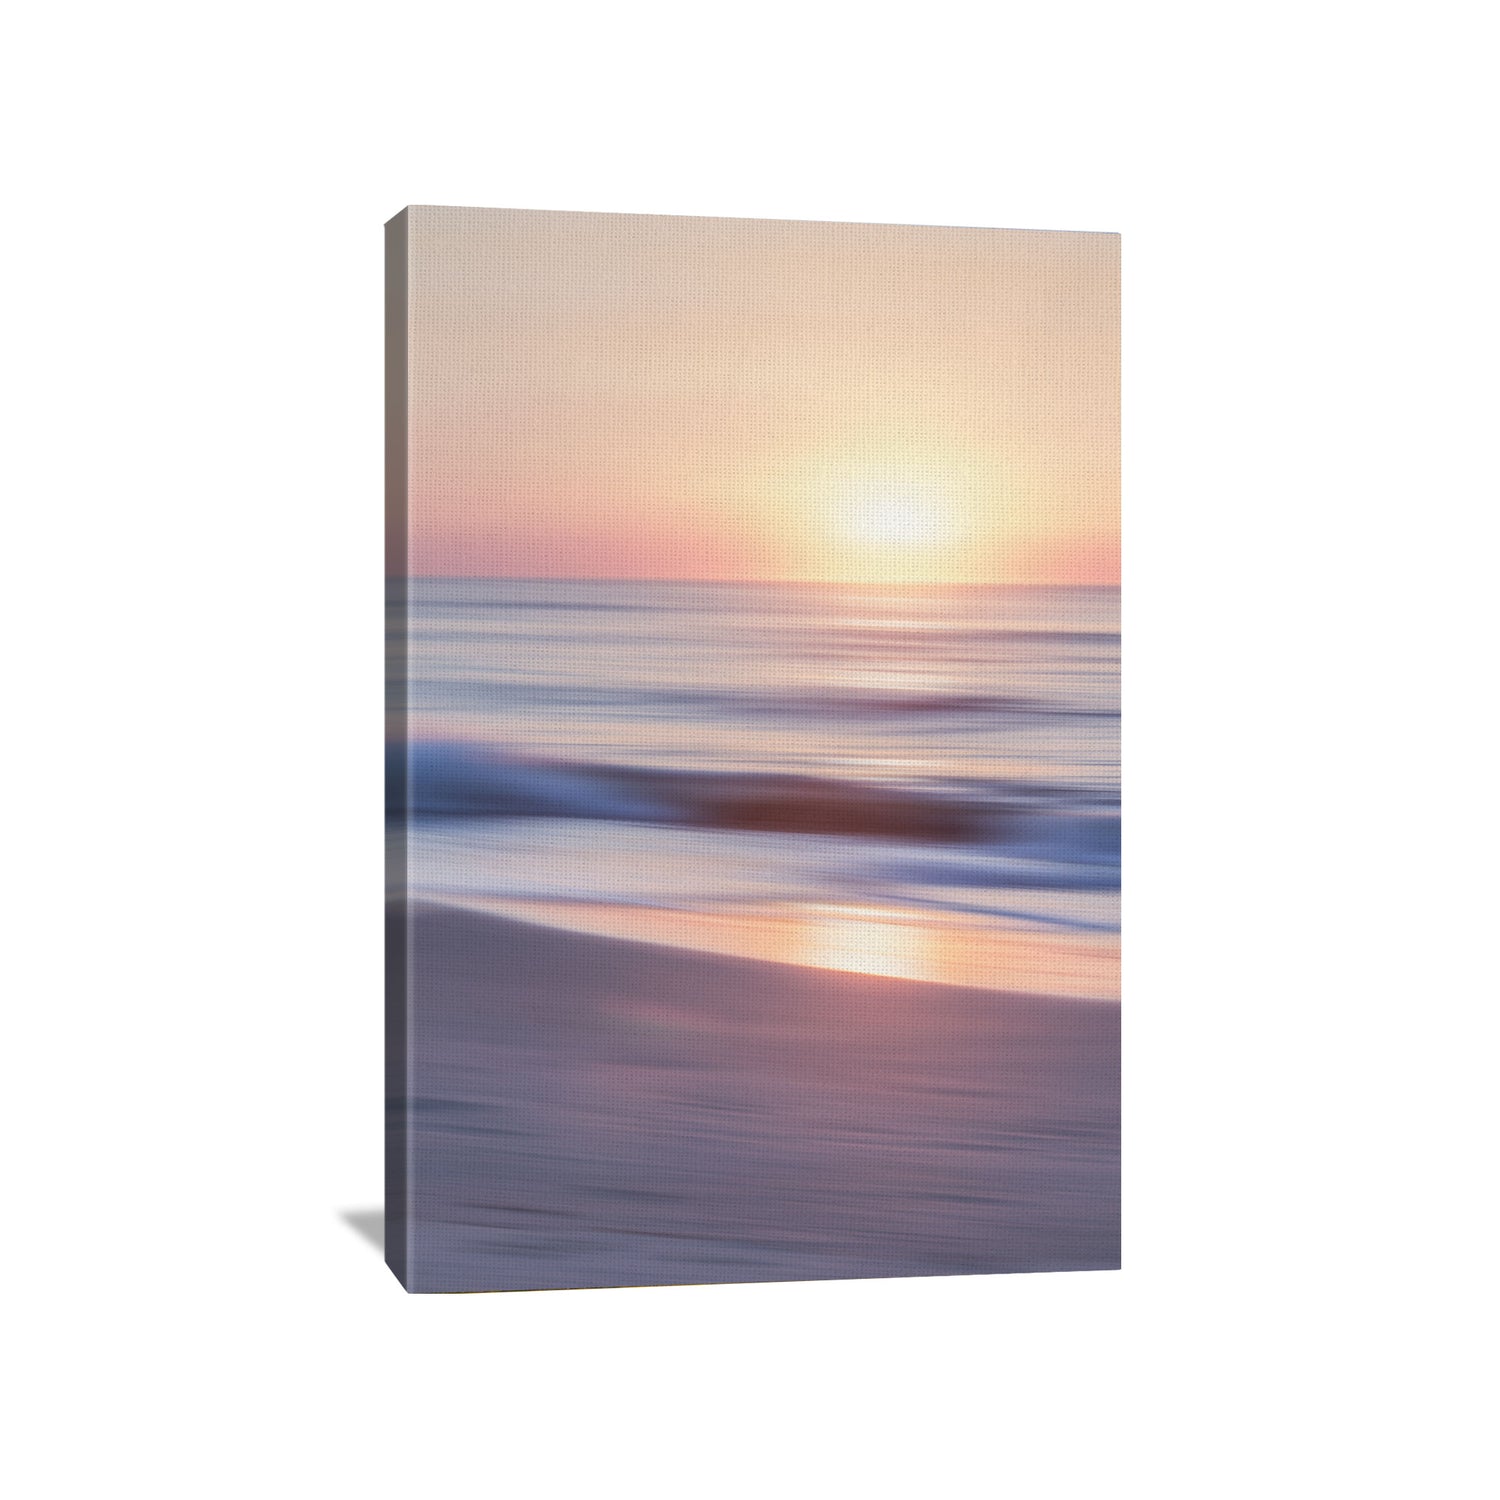 North Carolina inspired Ocean Sunrise - abstract beach scene on canvas capturing a tranquil dawn.